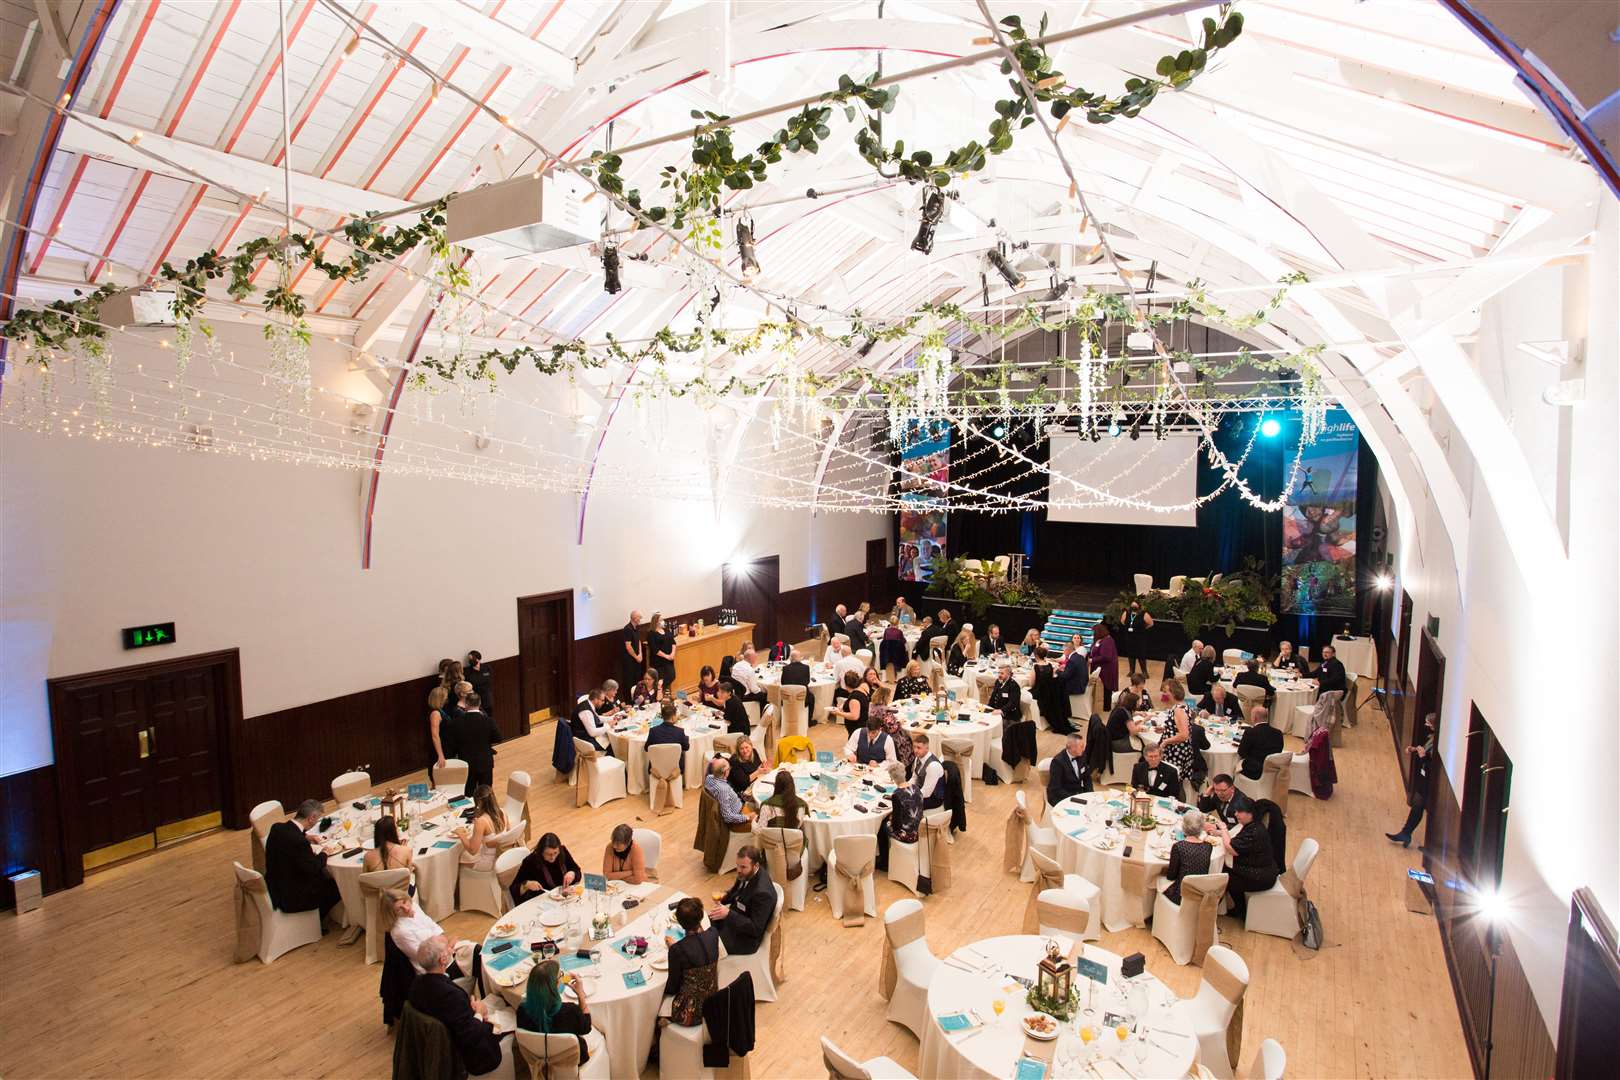 The Pavillion was decorated beautifully. Pictures: Alison White Photography